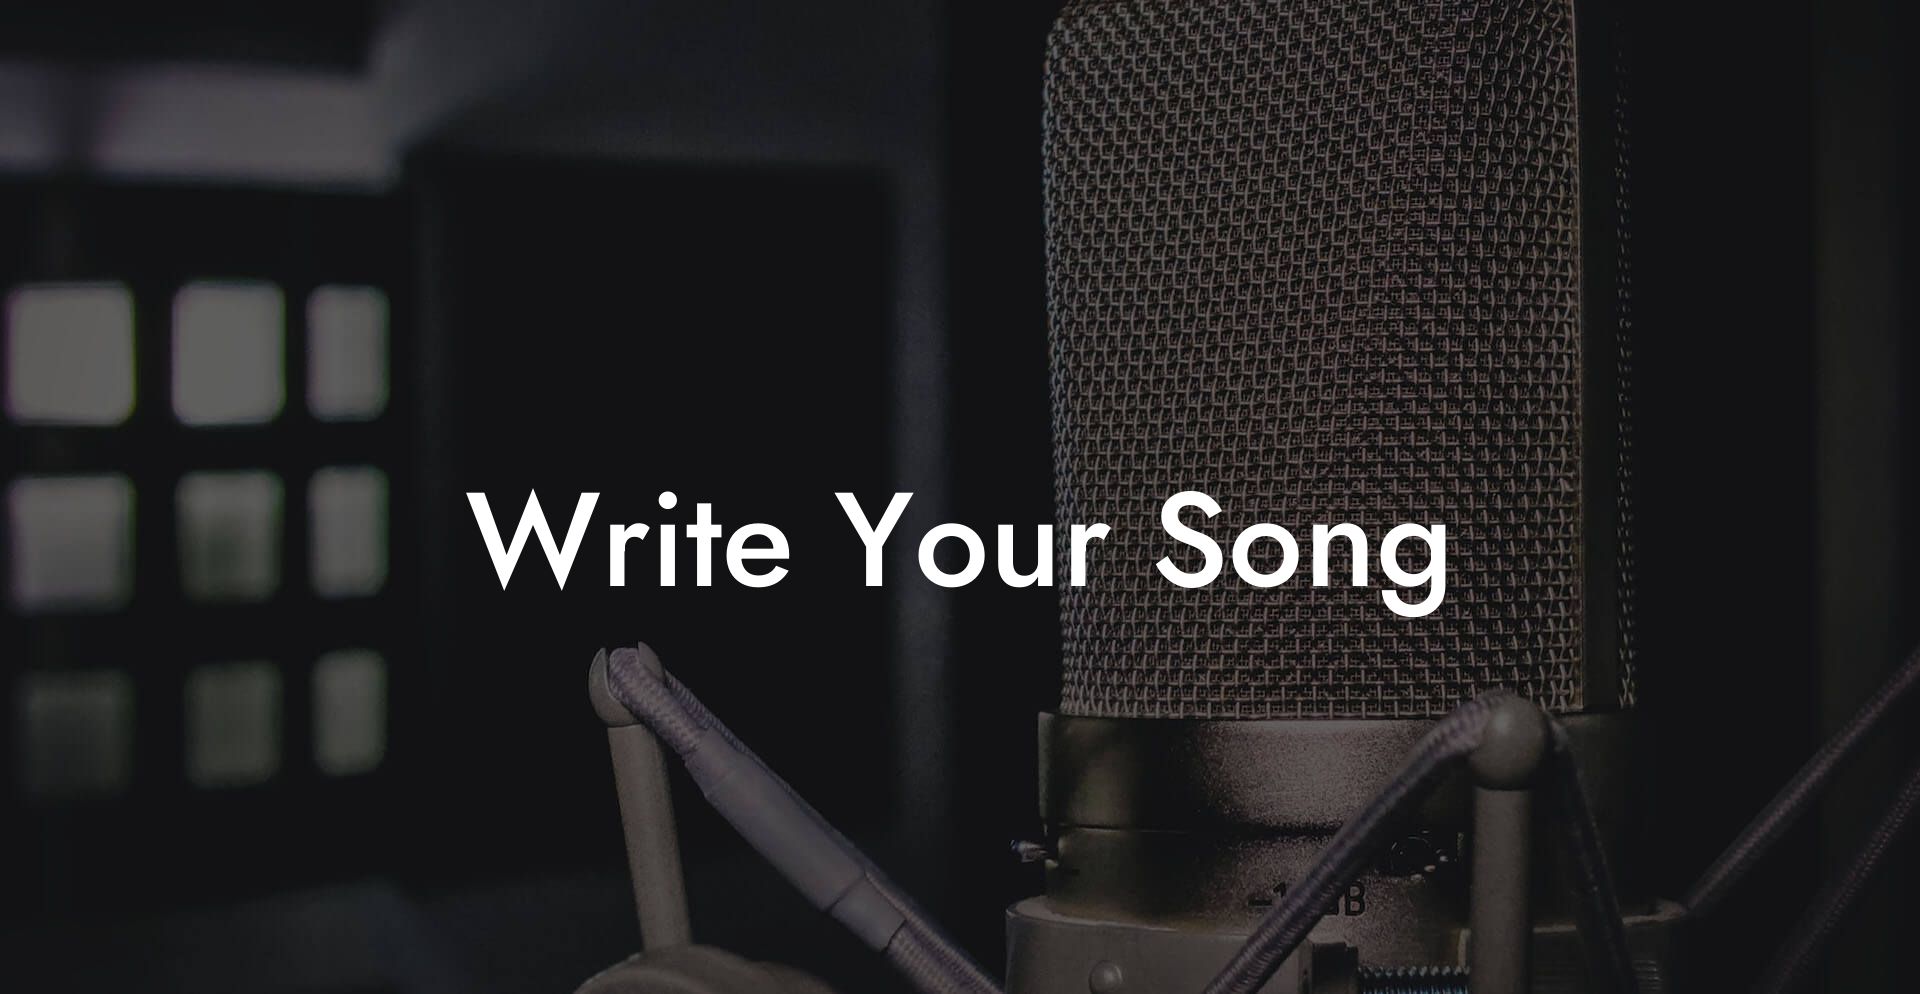 write your song lyric assistant